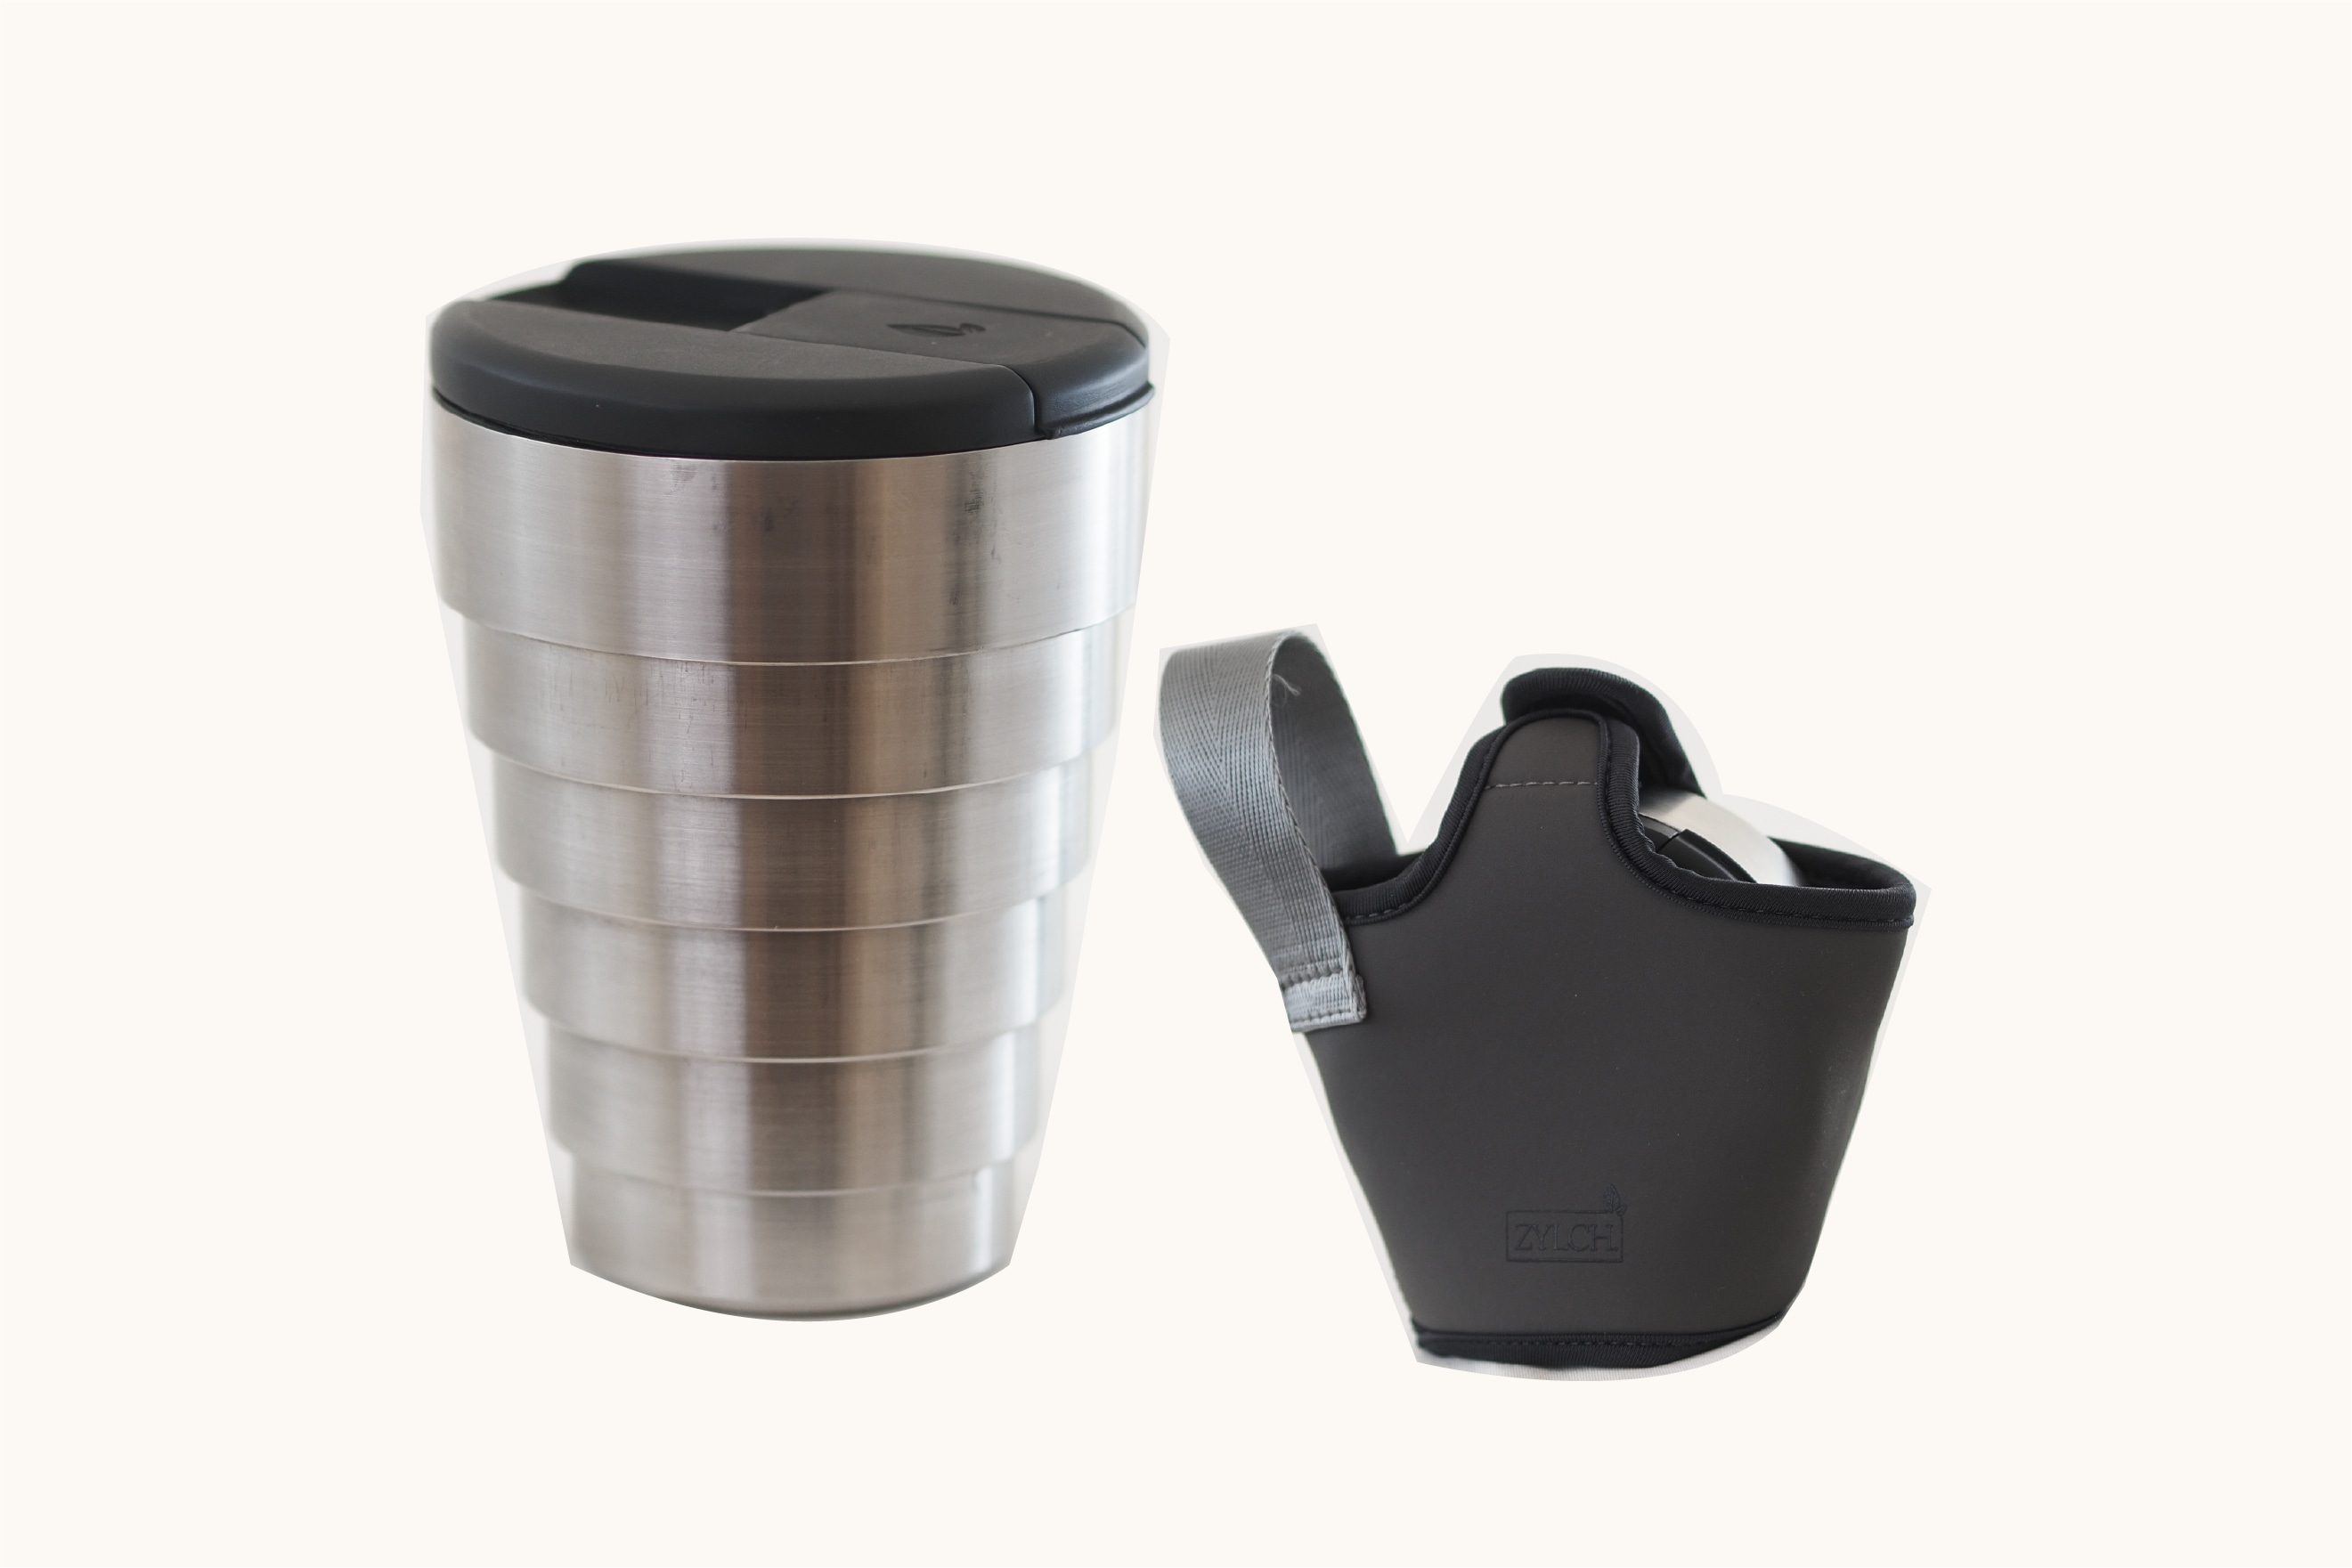 ZYLCH collapsible stainless steel cup helps protect the